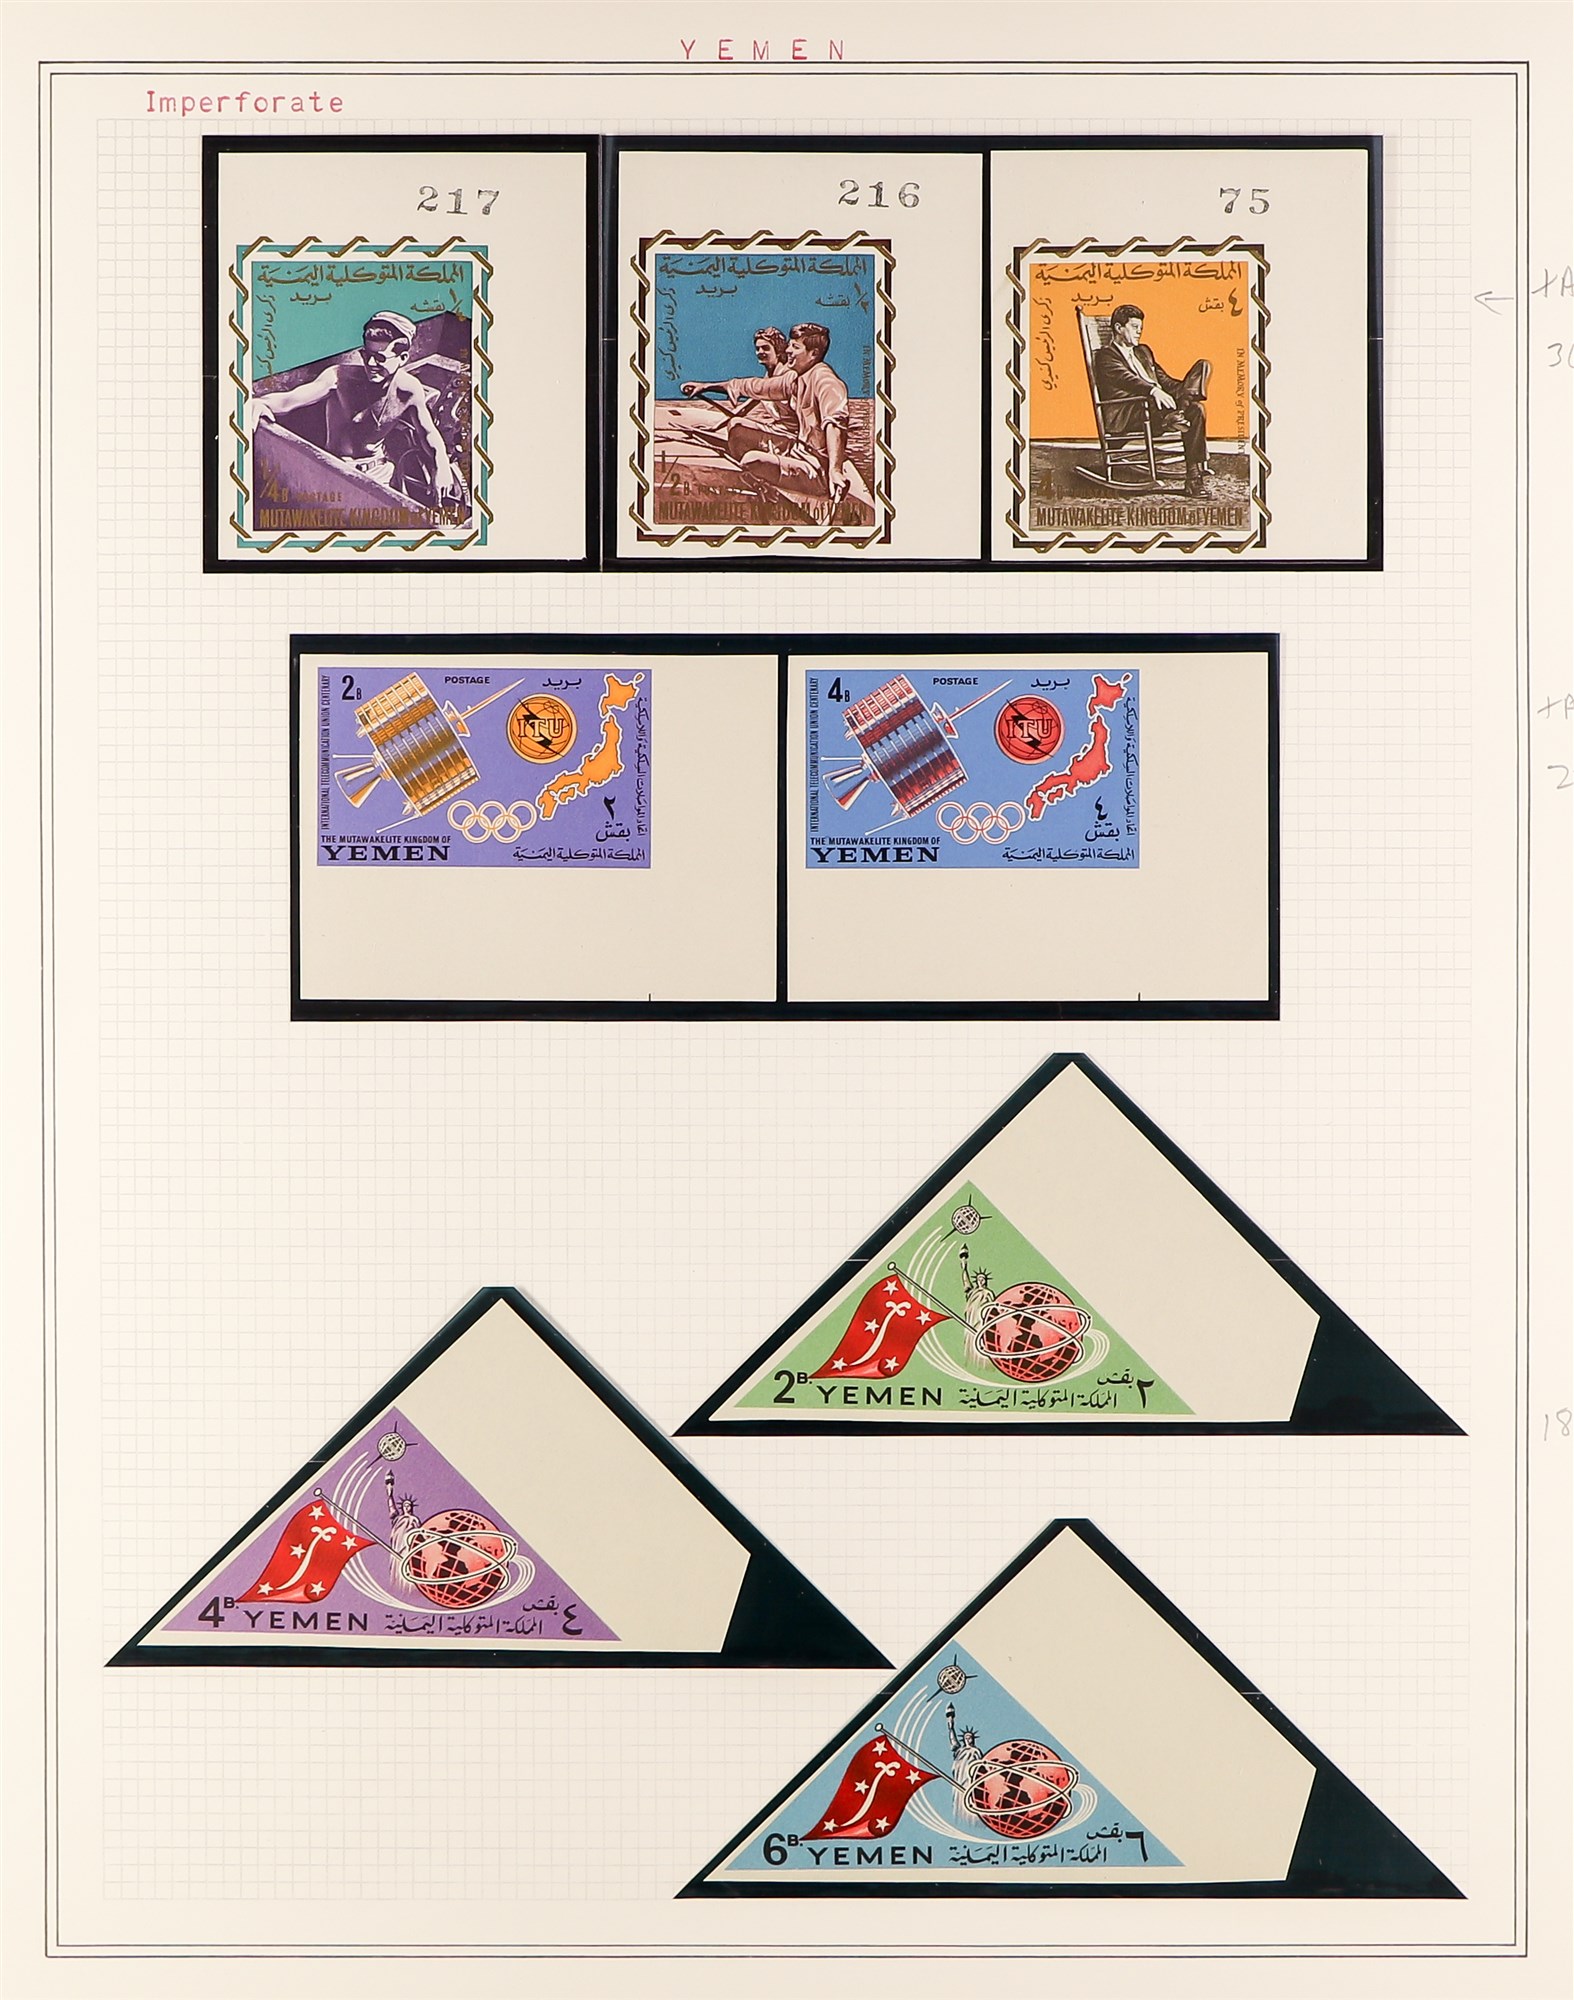 YEMEN 1961 - 1967 IMPERFORATES collection of imperforate sets in never hinged mint condition, - Image 4 of 6